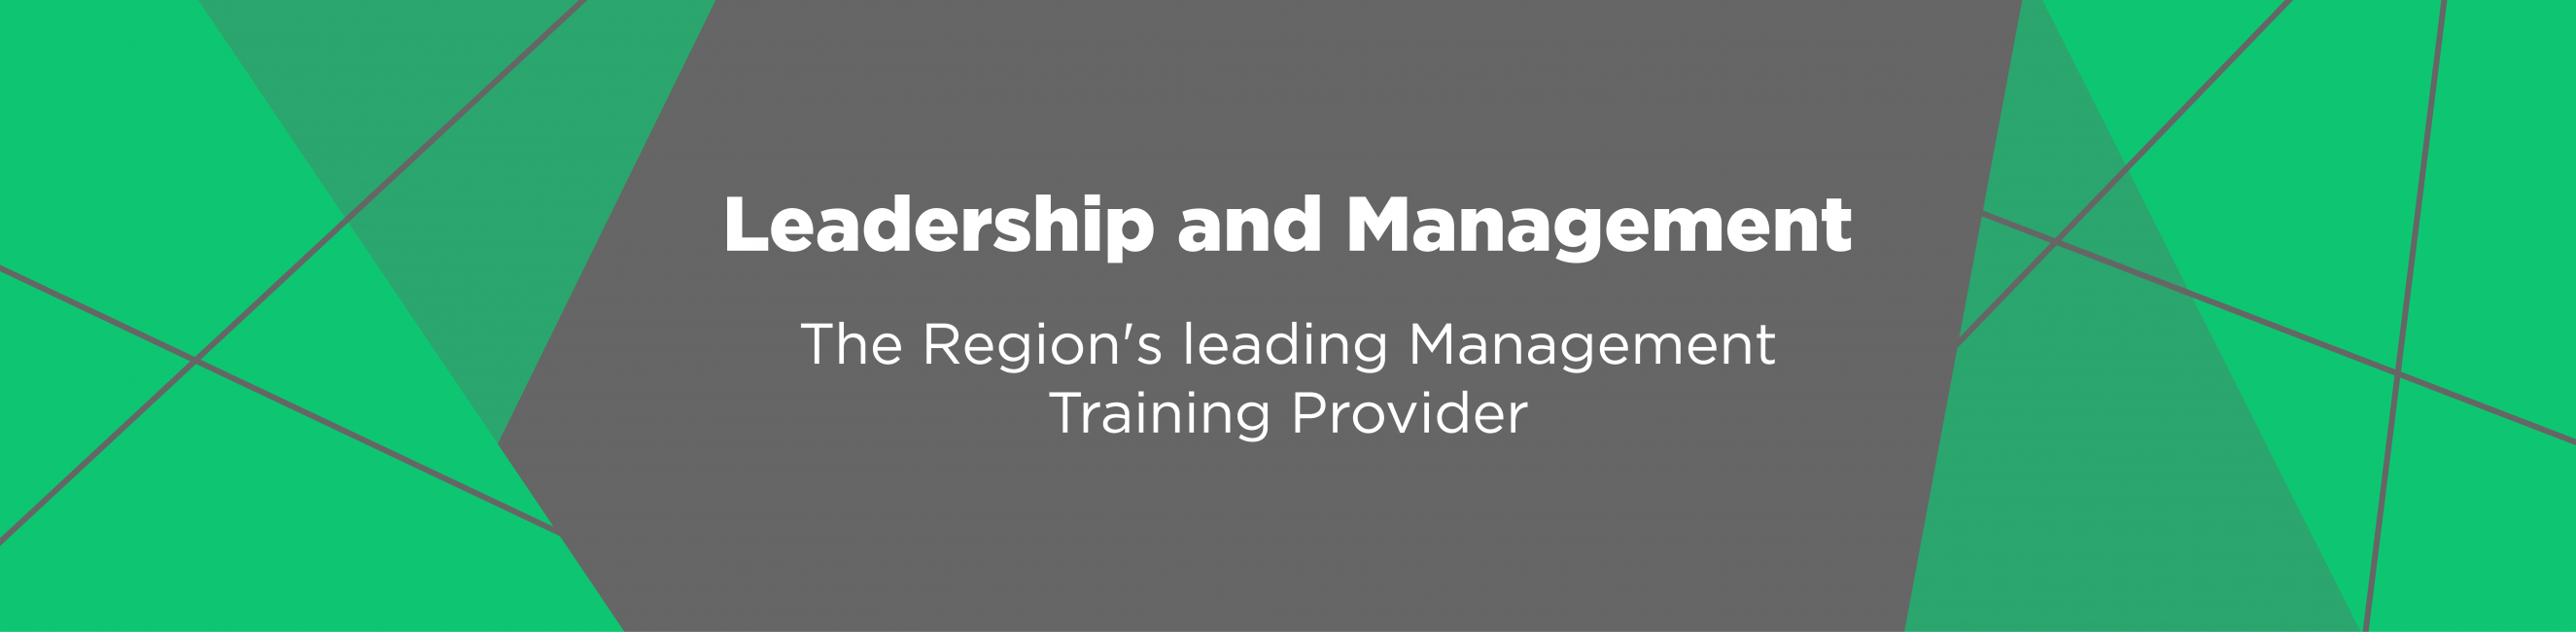 Leadership and Management courses, Weston College